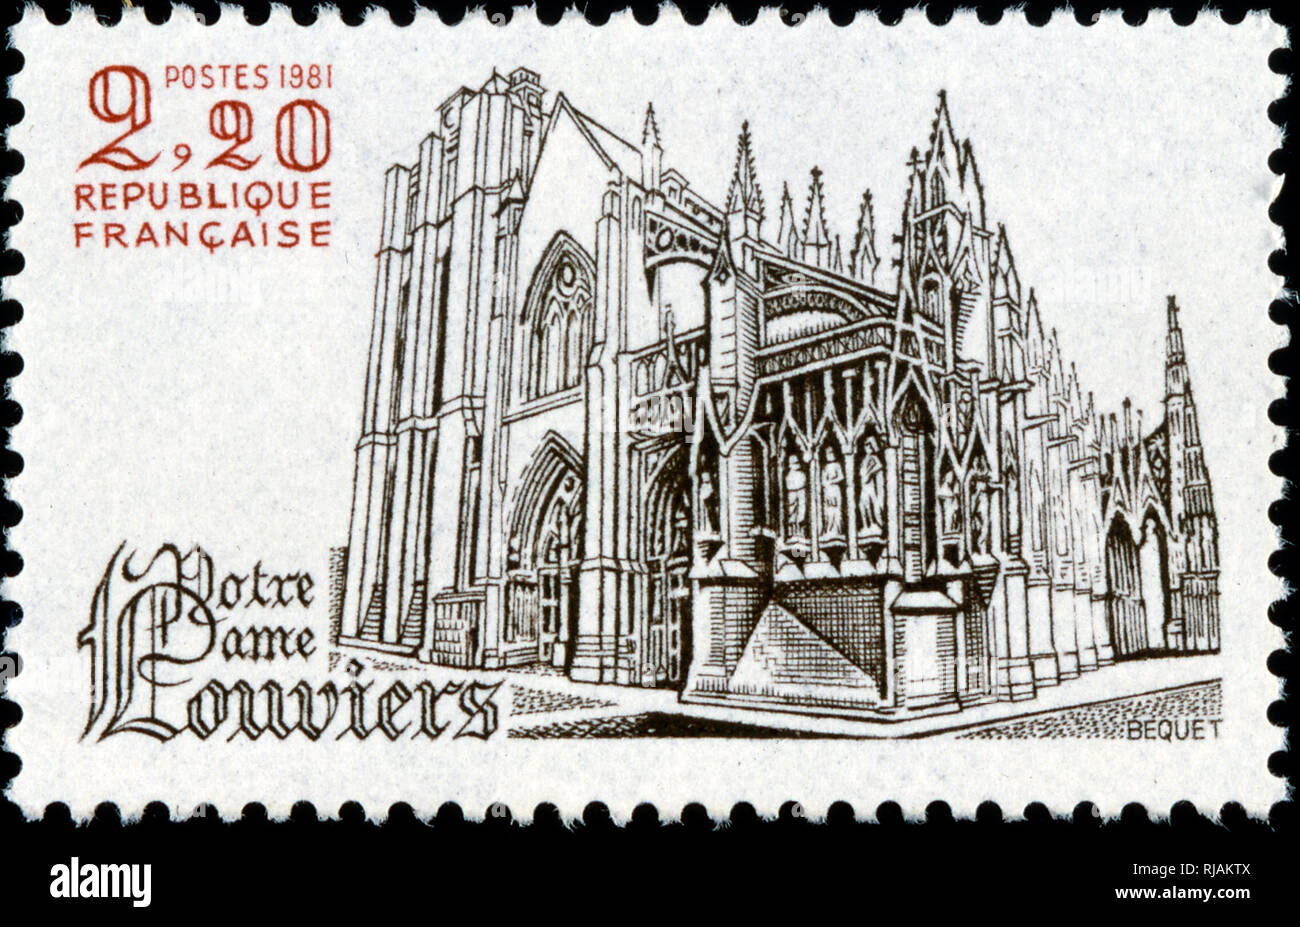 French postage stamp celebrating the Church of Notre-Dame de Louviers, a parish church located in Louviers, a town in the Eure department. It is a notable example of Gothic church architecture in northern France. Stock Photo